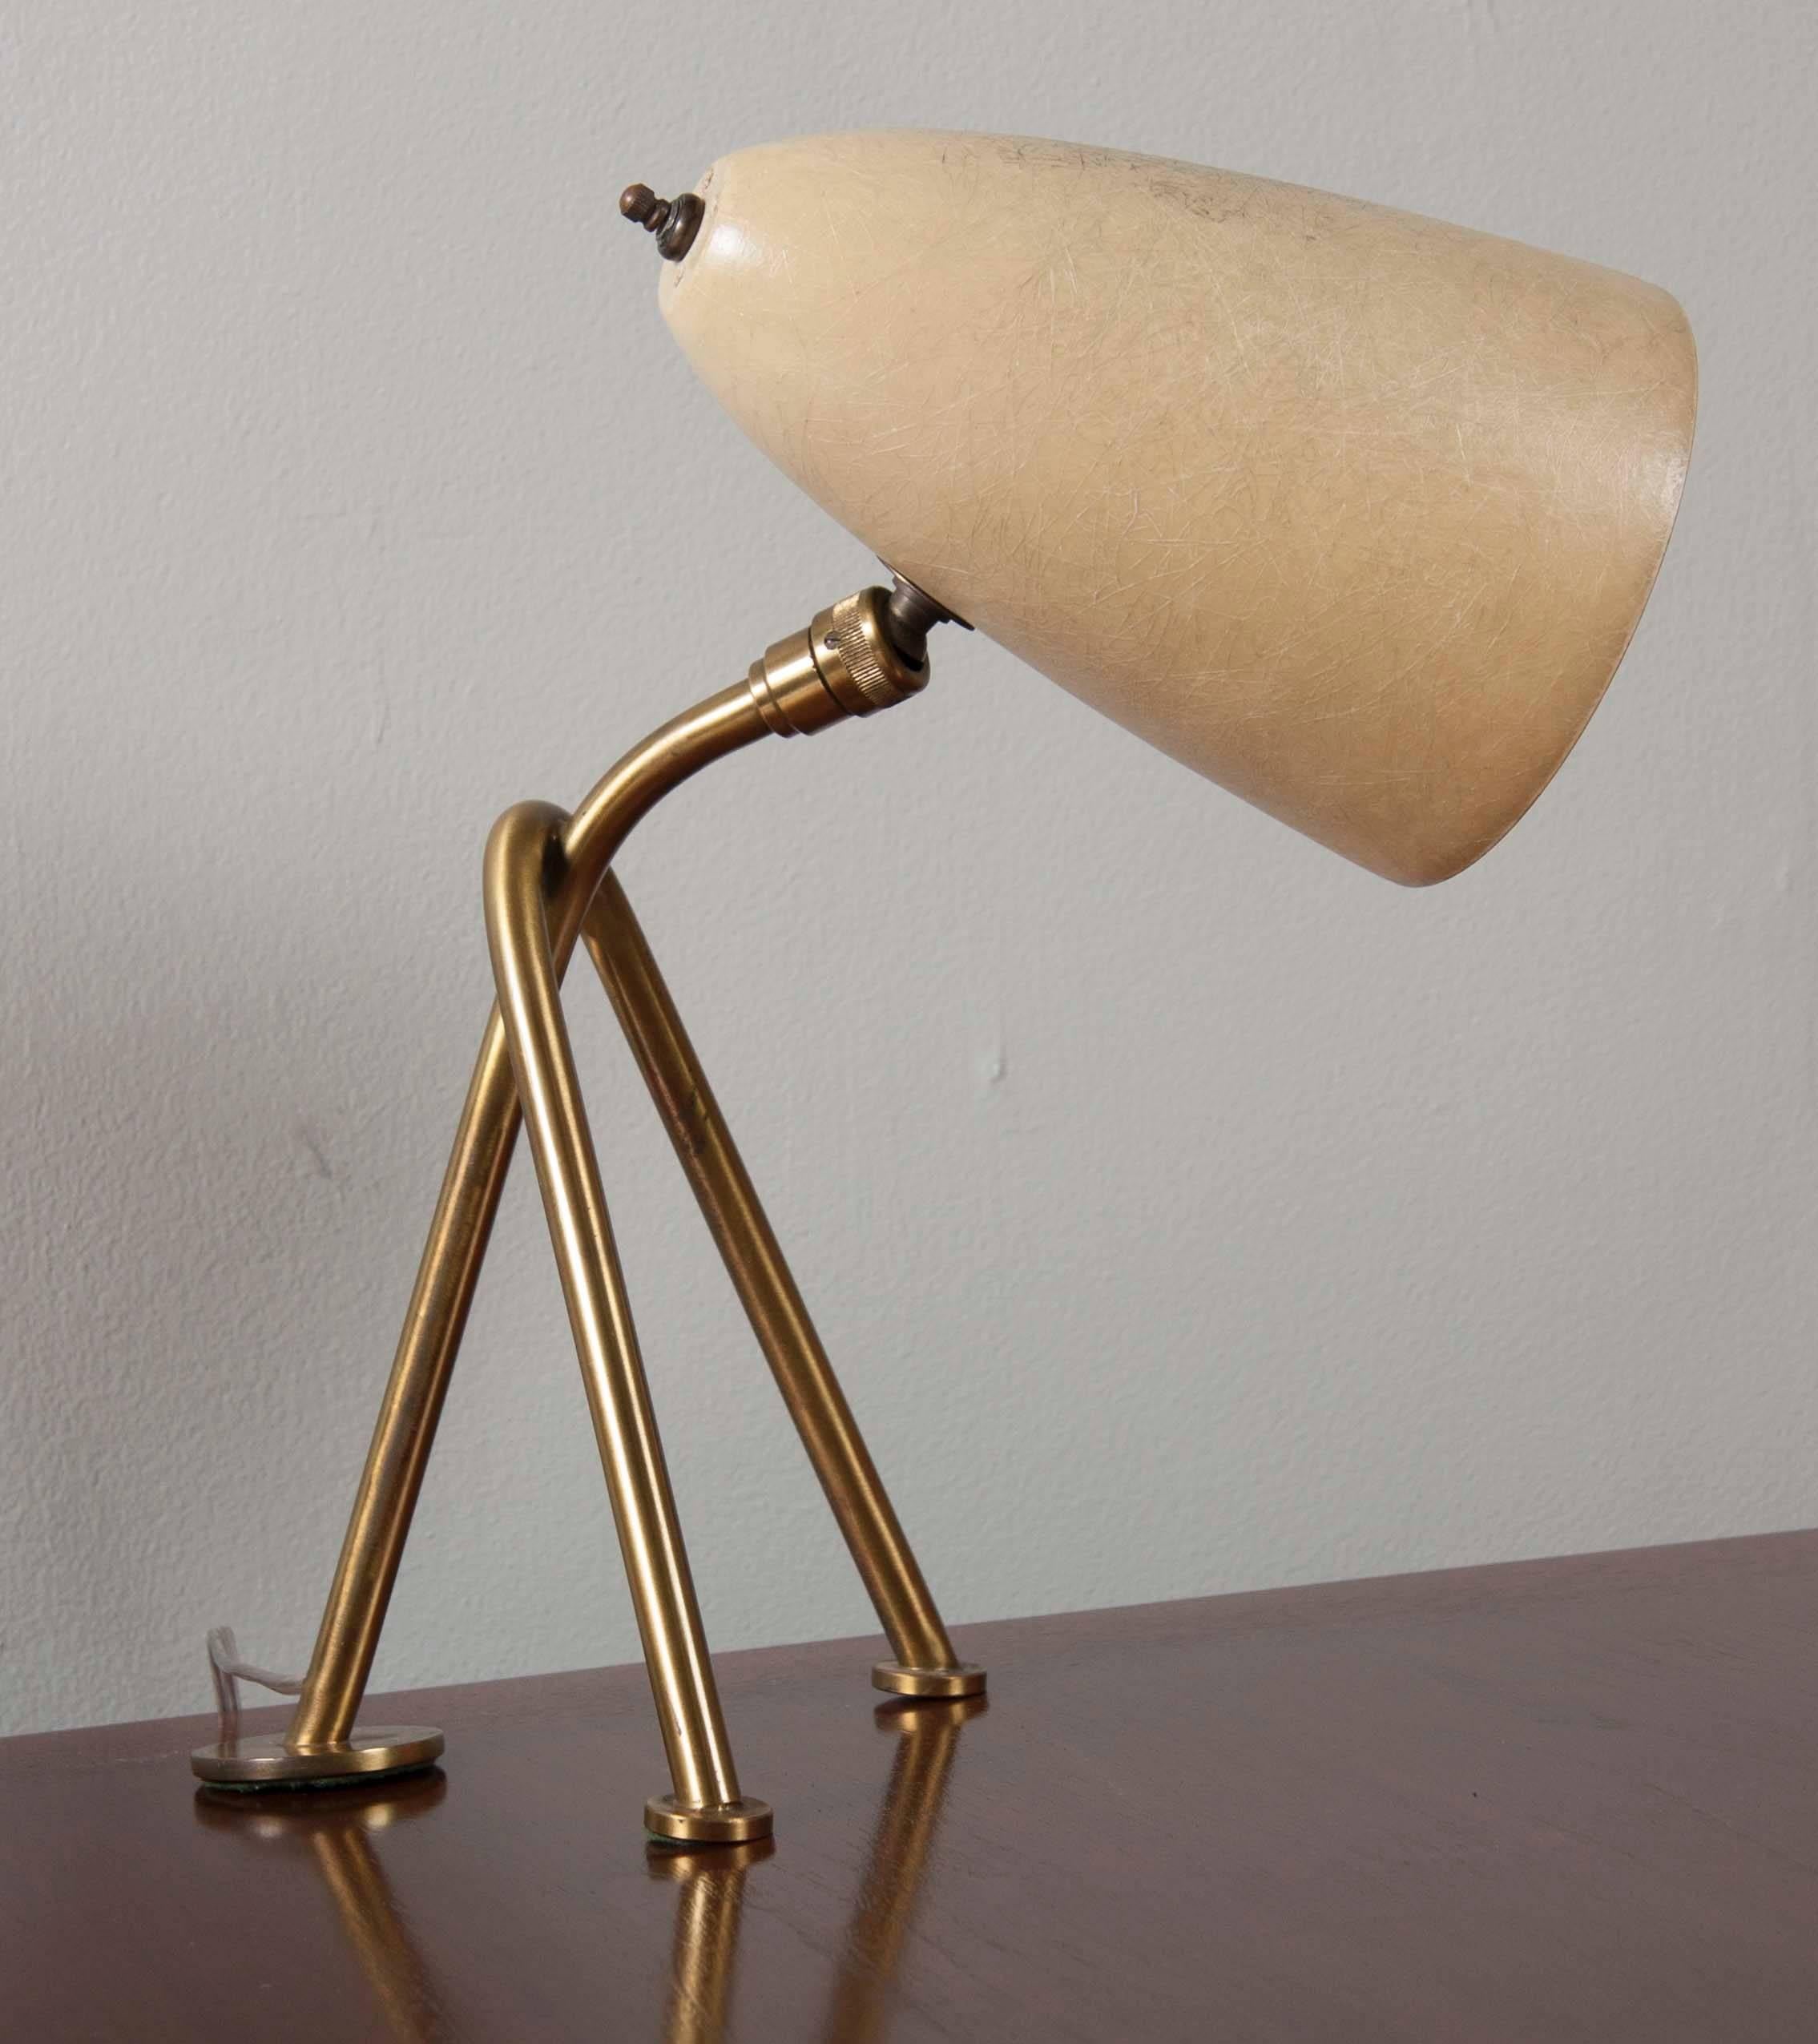 Beautiful, all original Greta Grossman desk lamp with cream shade. Newly rewired. Slight discoloration on top of shade, but not at ll noticeable when lit.
Warm brass patina and original switch.